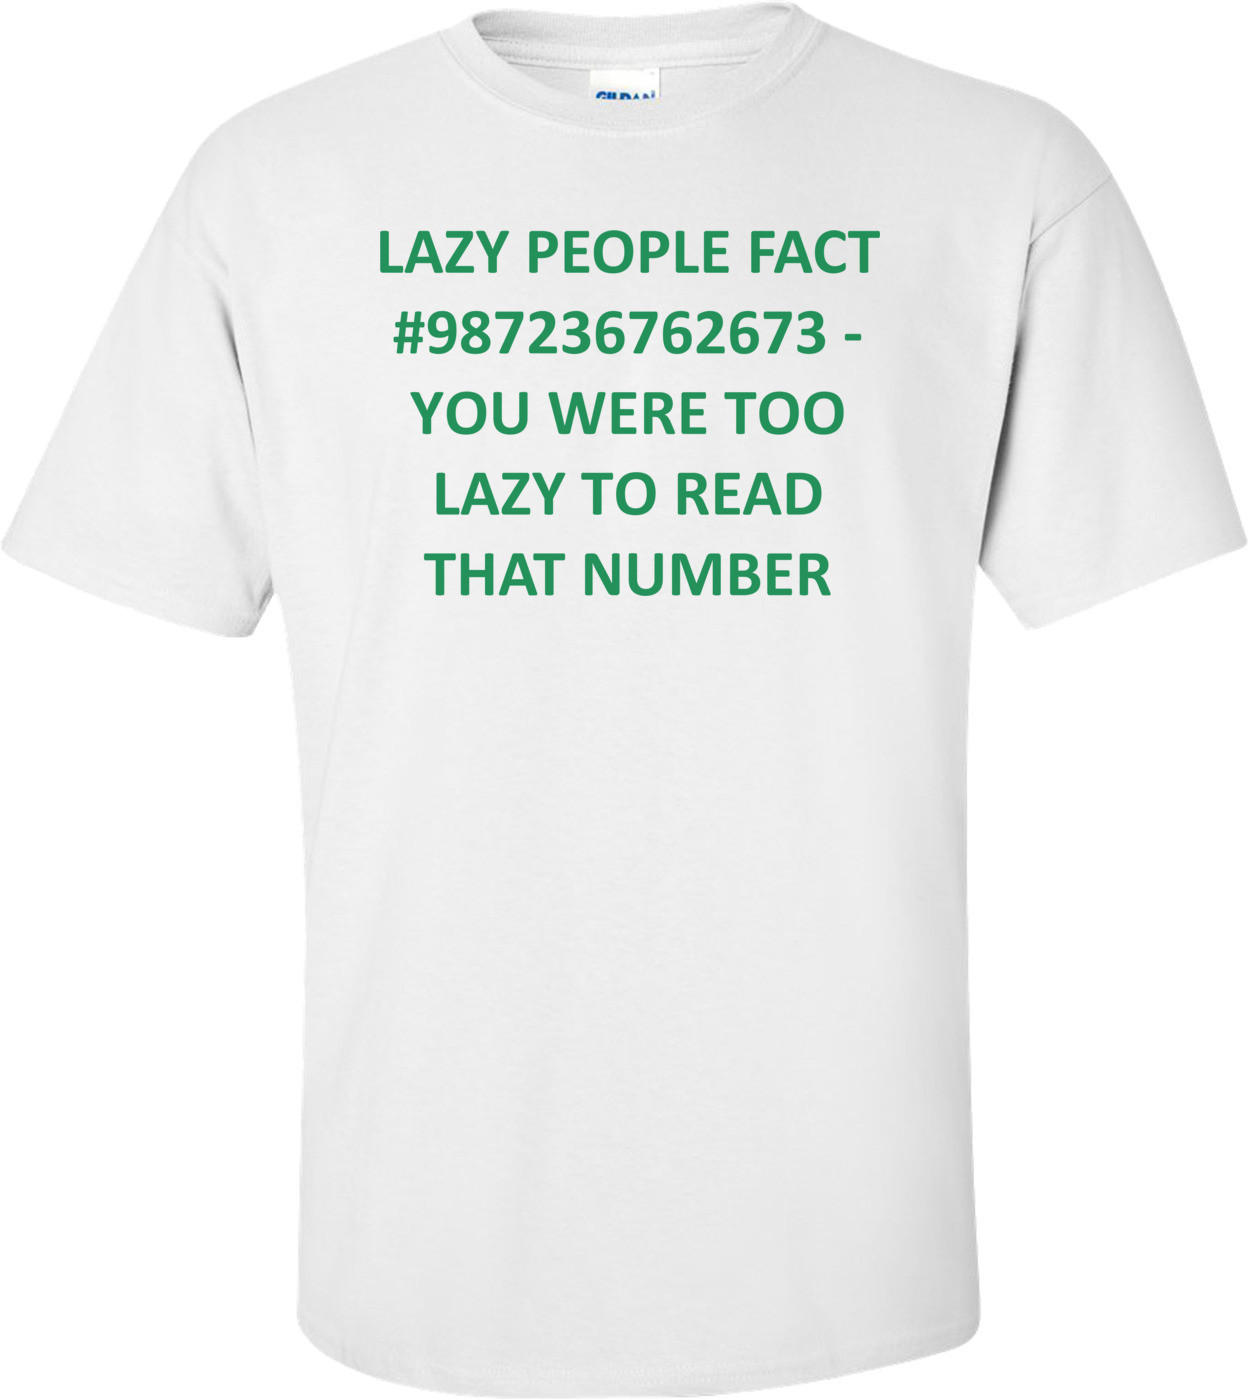 LAZY PEOPLE FACT #987236762673 - YOU WERE TOO LAZY TO READ THAT NUMBER Shirt